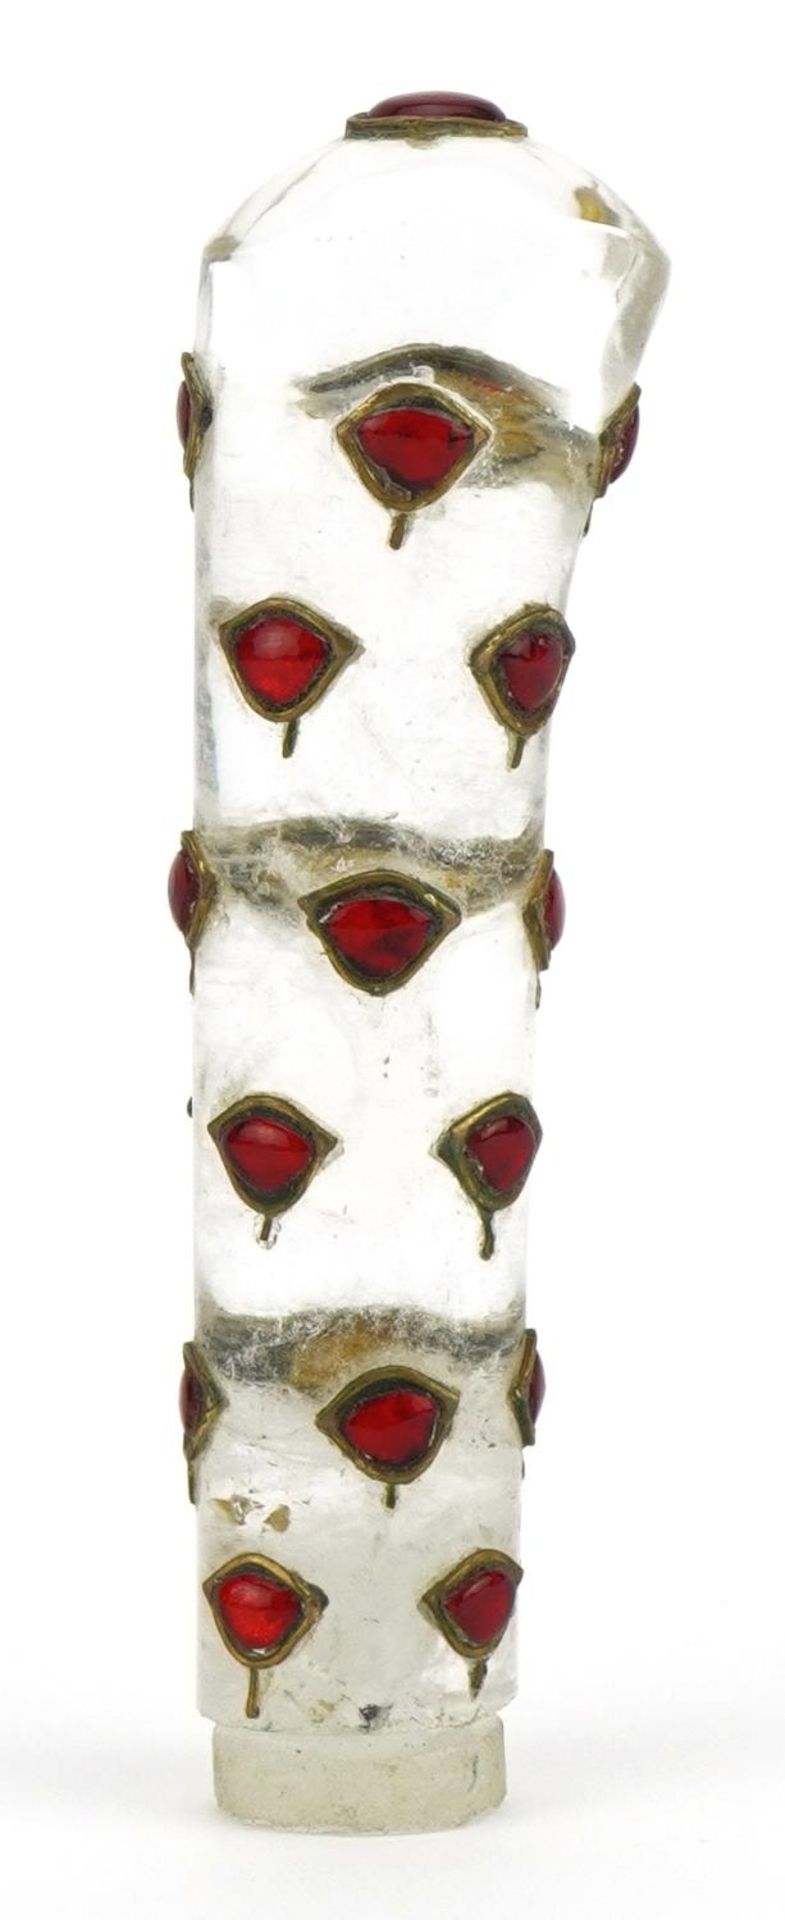 Islamic rock crystal dagger handle inset with red cabochons, 9cm in length - Image 2 of 3